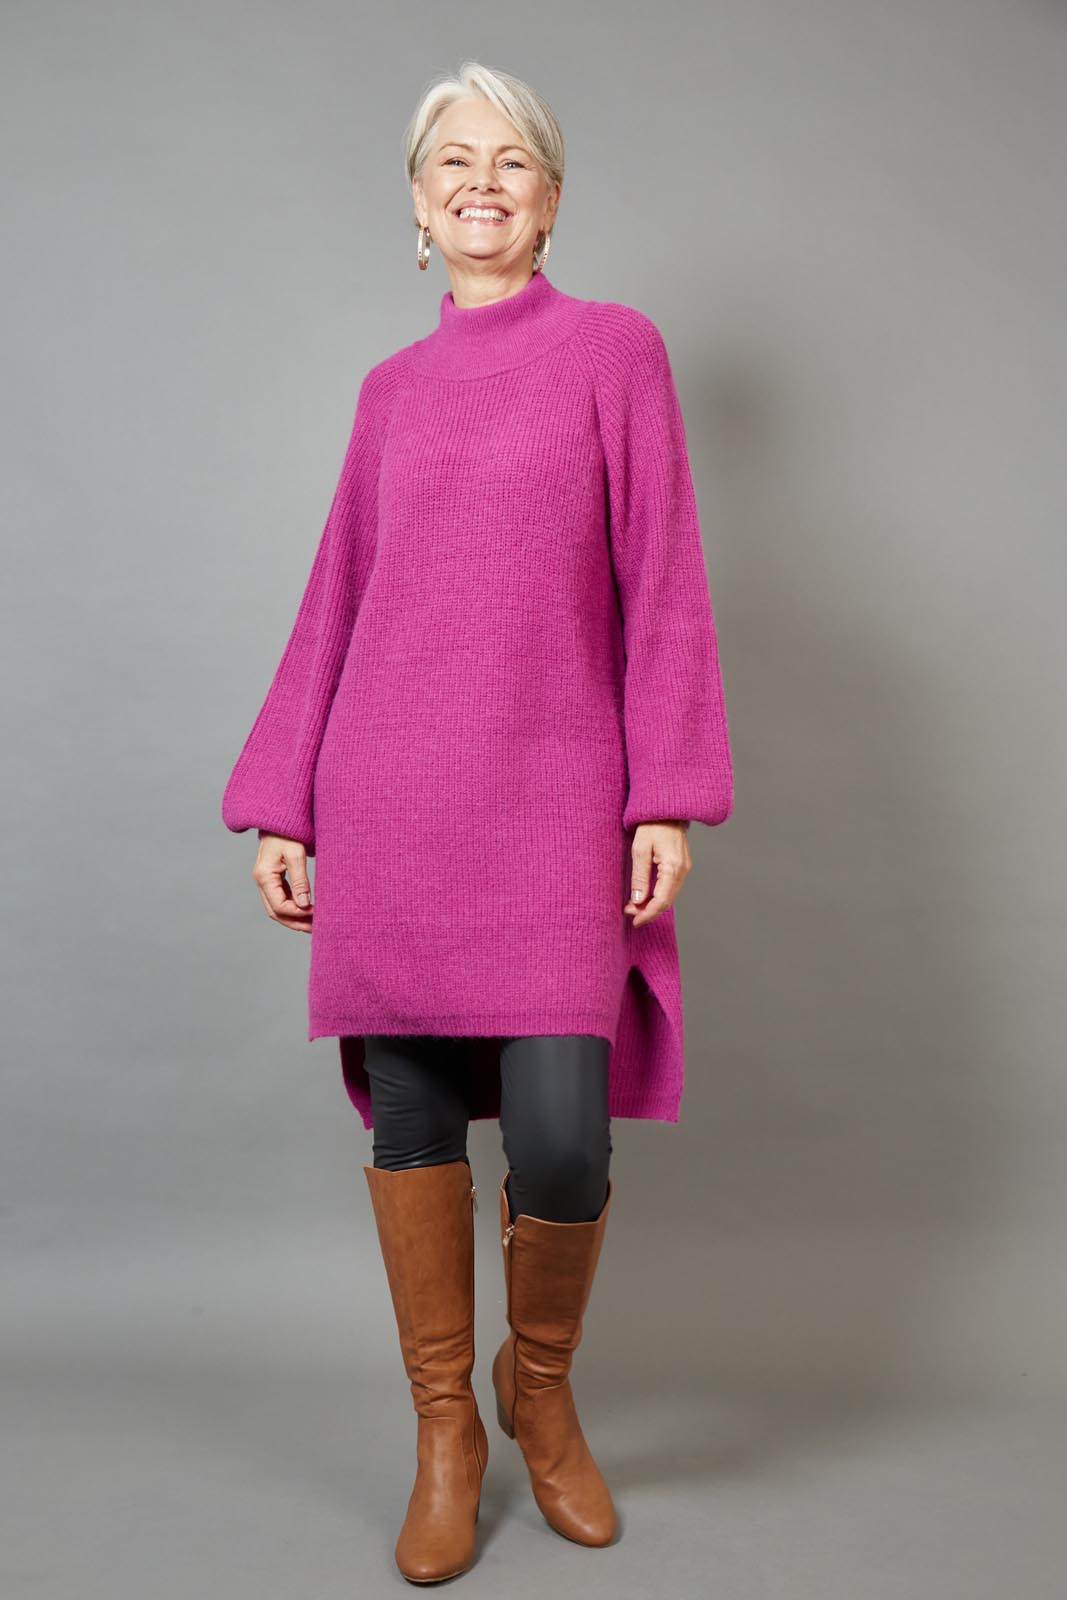 Kit Knit Top/Dress - Mulberry - eb&ive Clothing - Knit Top/Dress